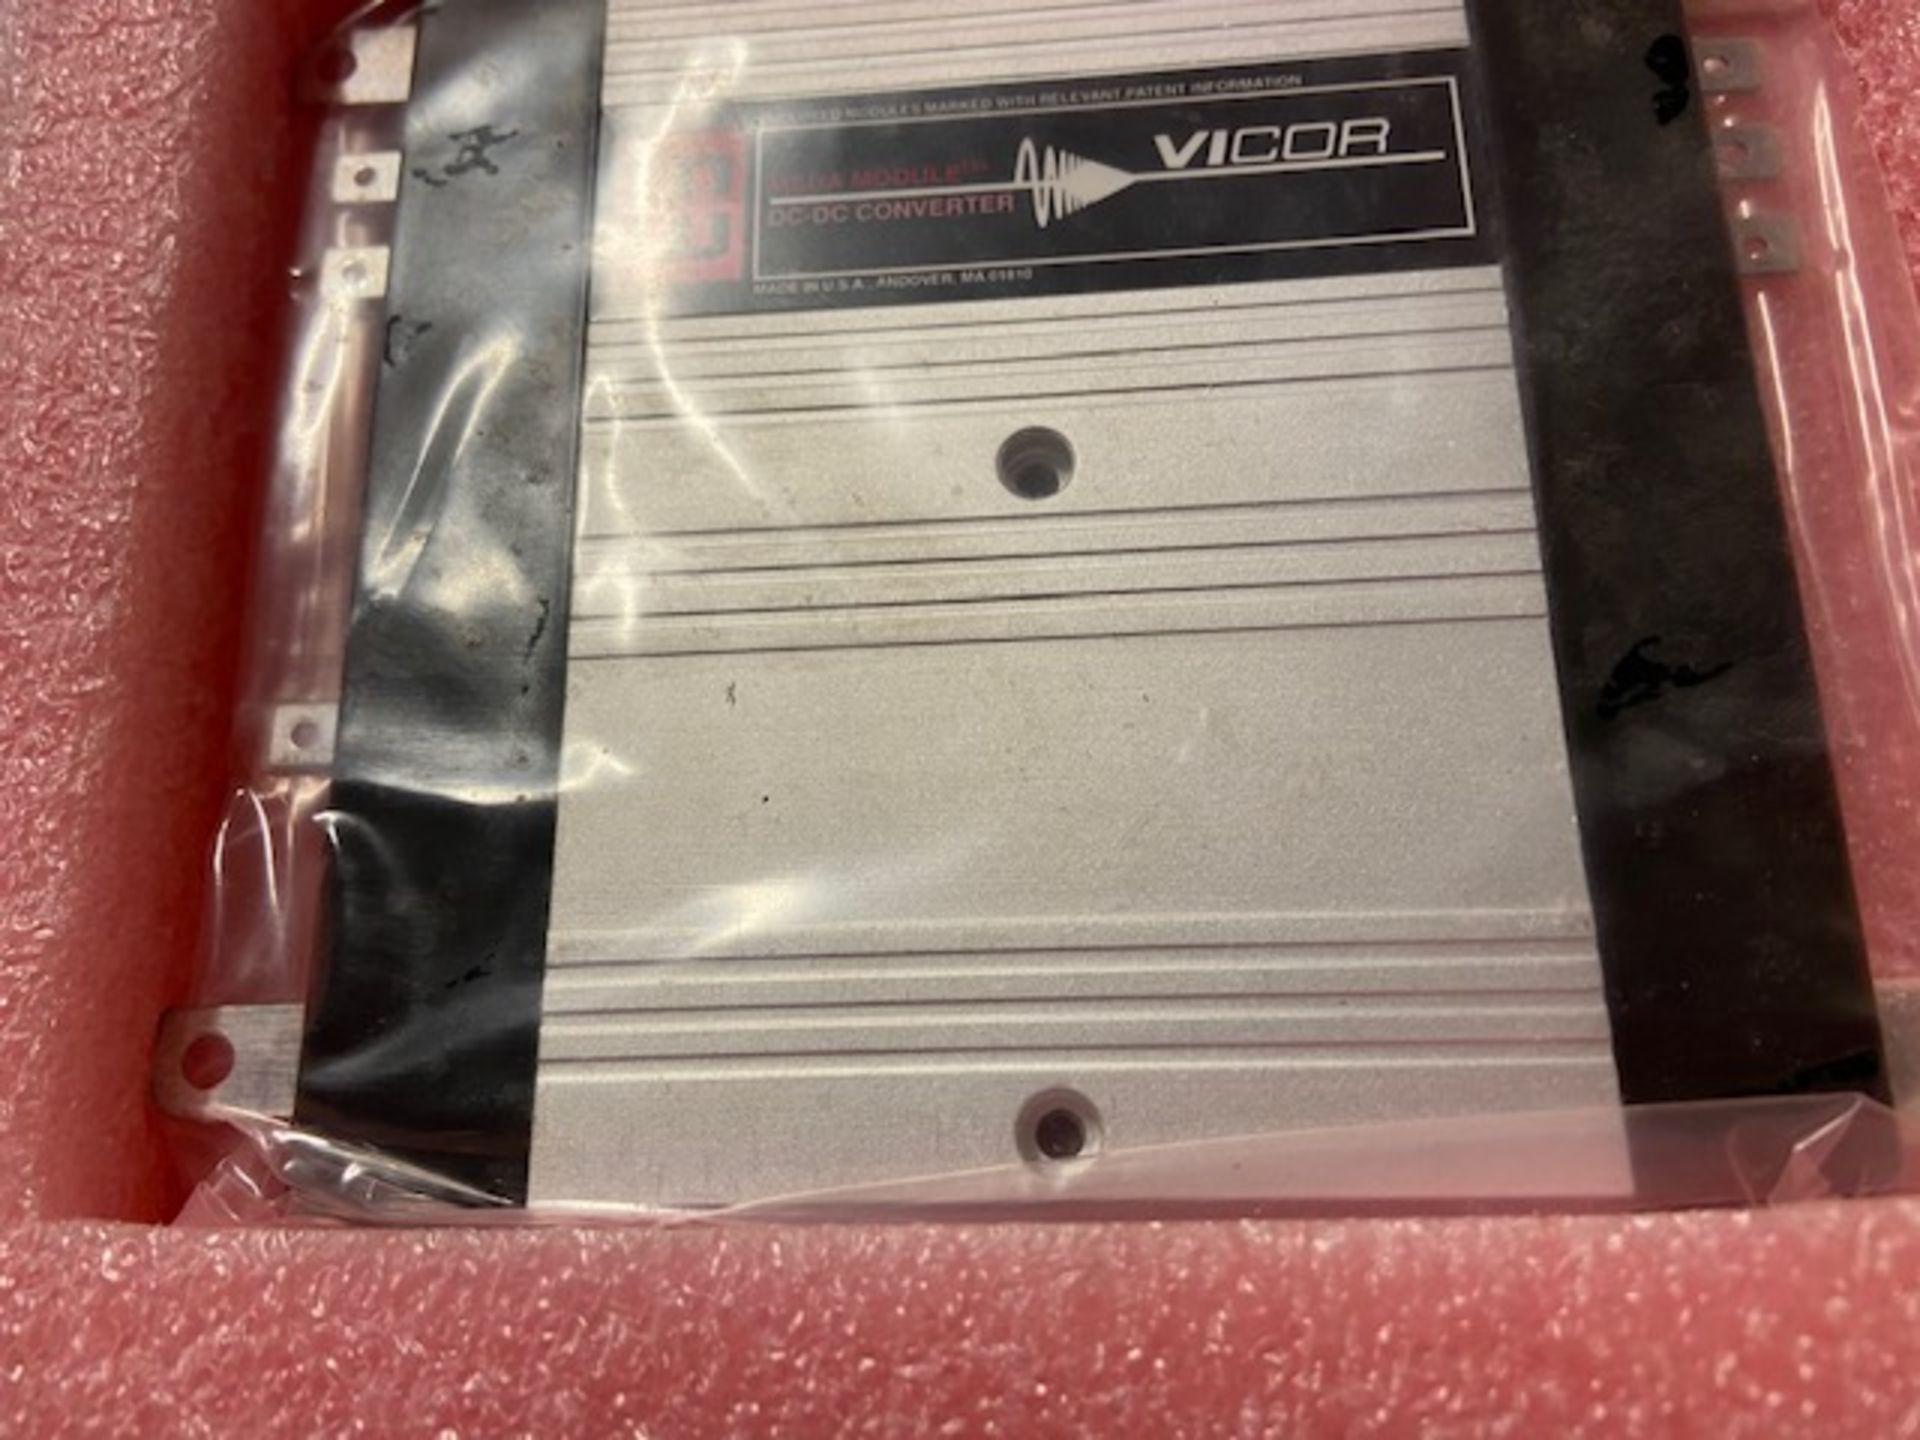 Tripp-Lite Power Surge Protector Vicor Ven-Tel model 1200-32 with Standard NDC Infrared Unit Part - Image 2 of 3